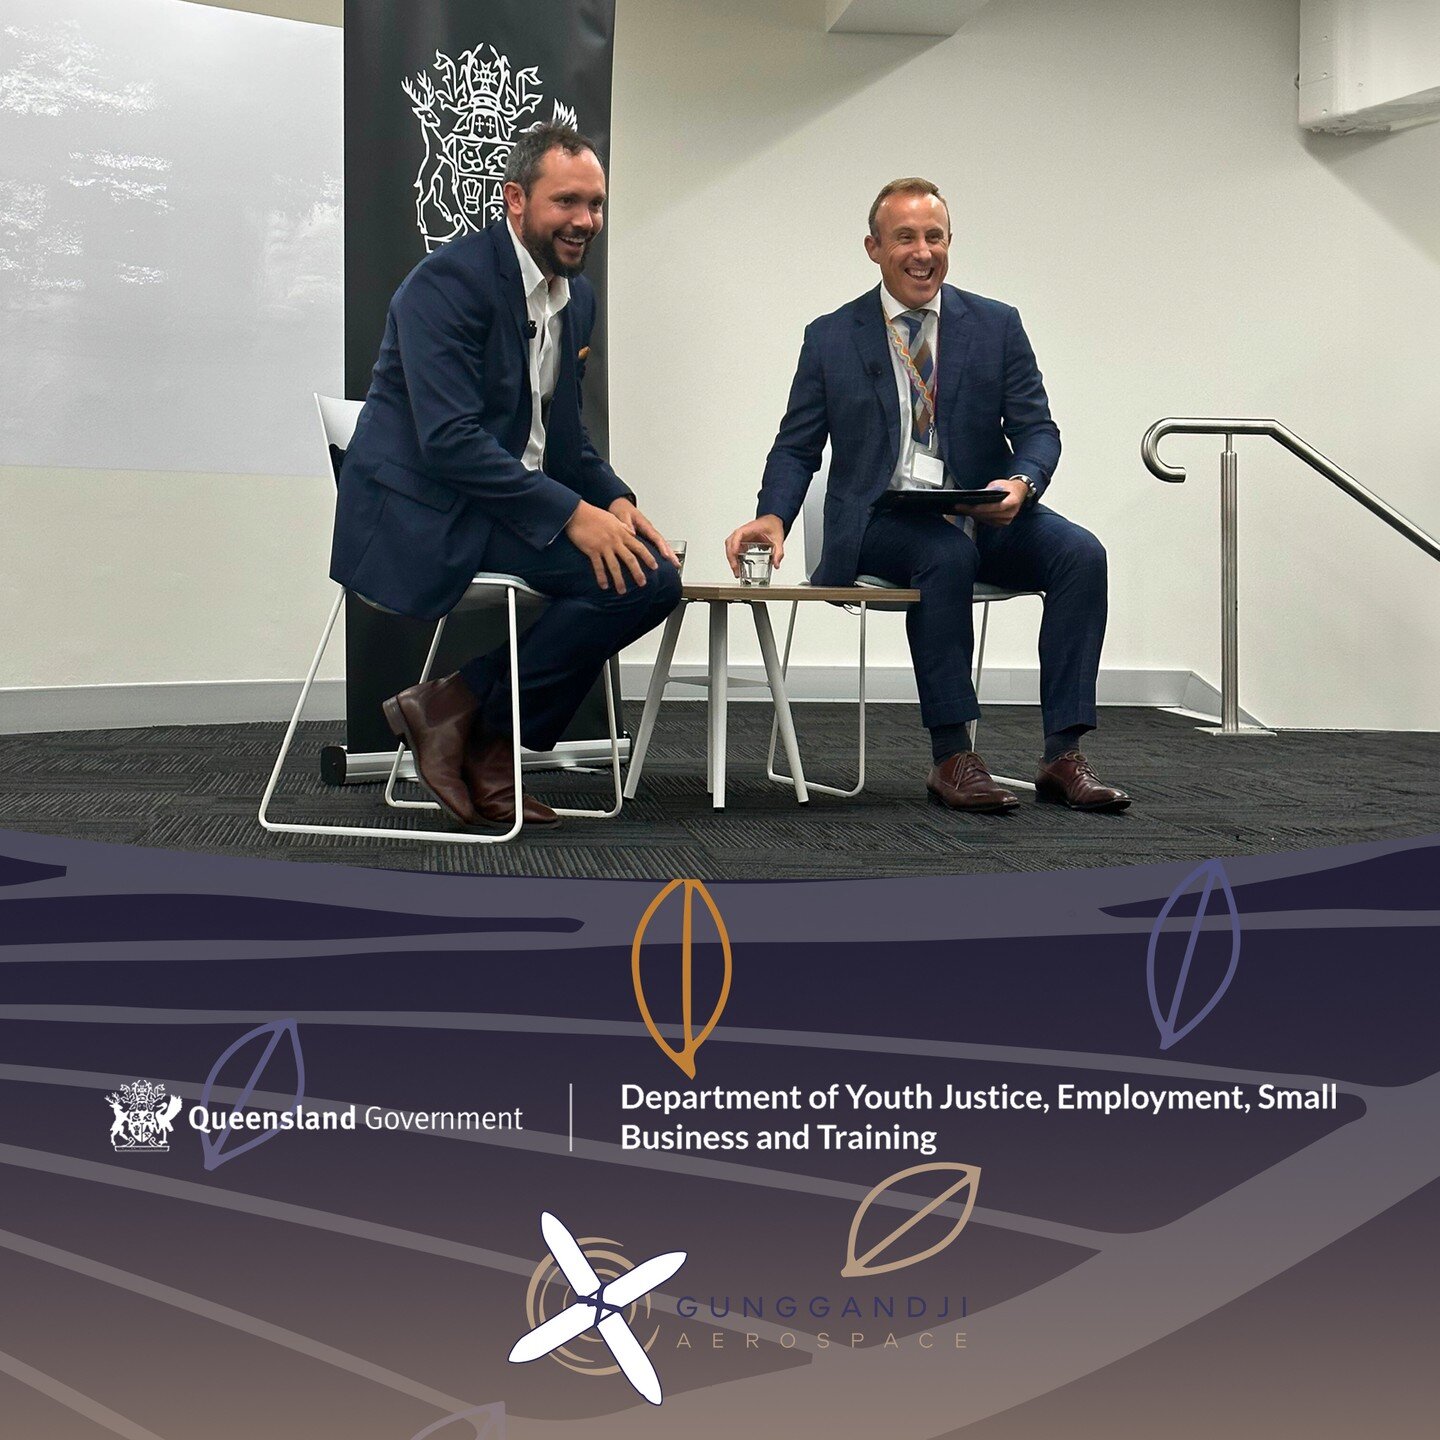 Last month, our Managing Director @danieljoinbee had the incredible opportunity to address a statewide audience of over 600 Queensland staff from the Department of Youth Justice, Employment, Small Business, and Training.

He shared the story of @gung